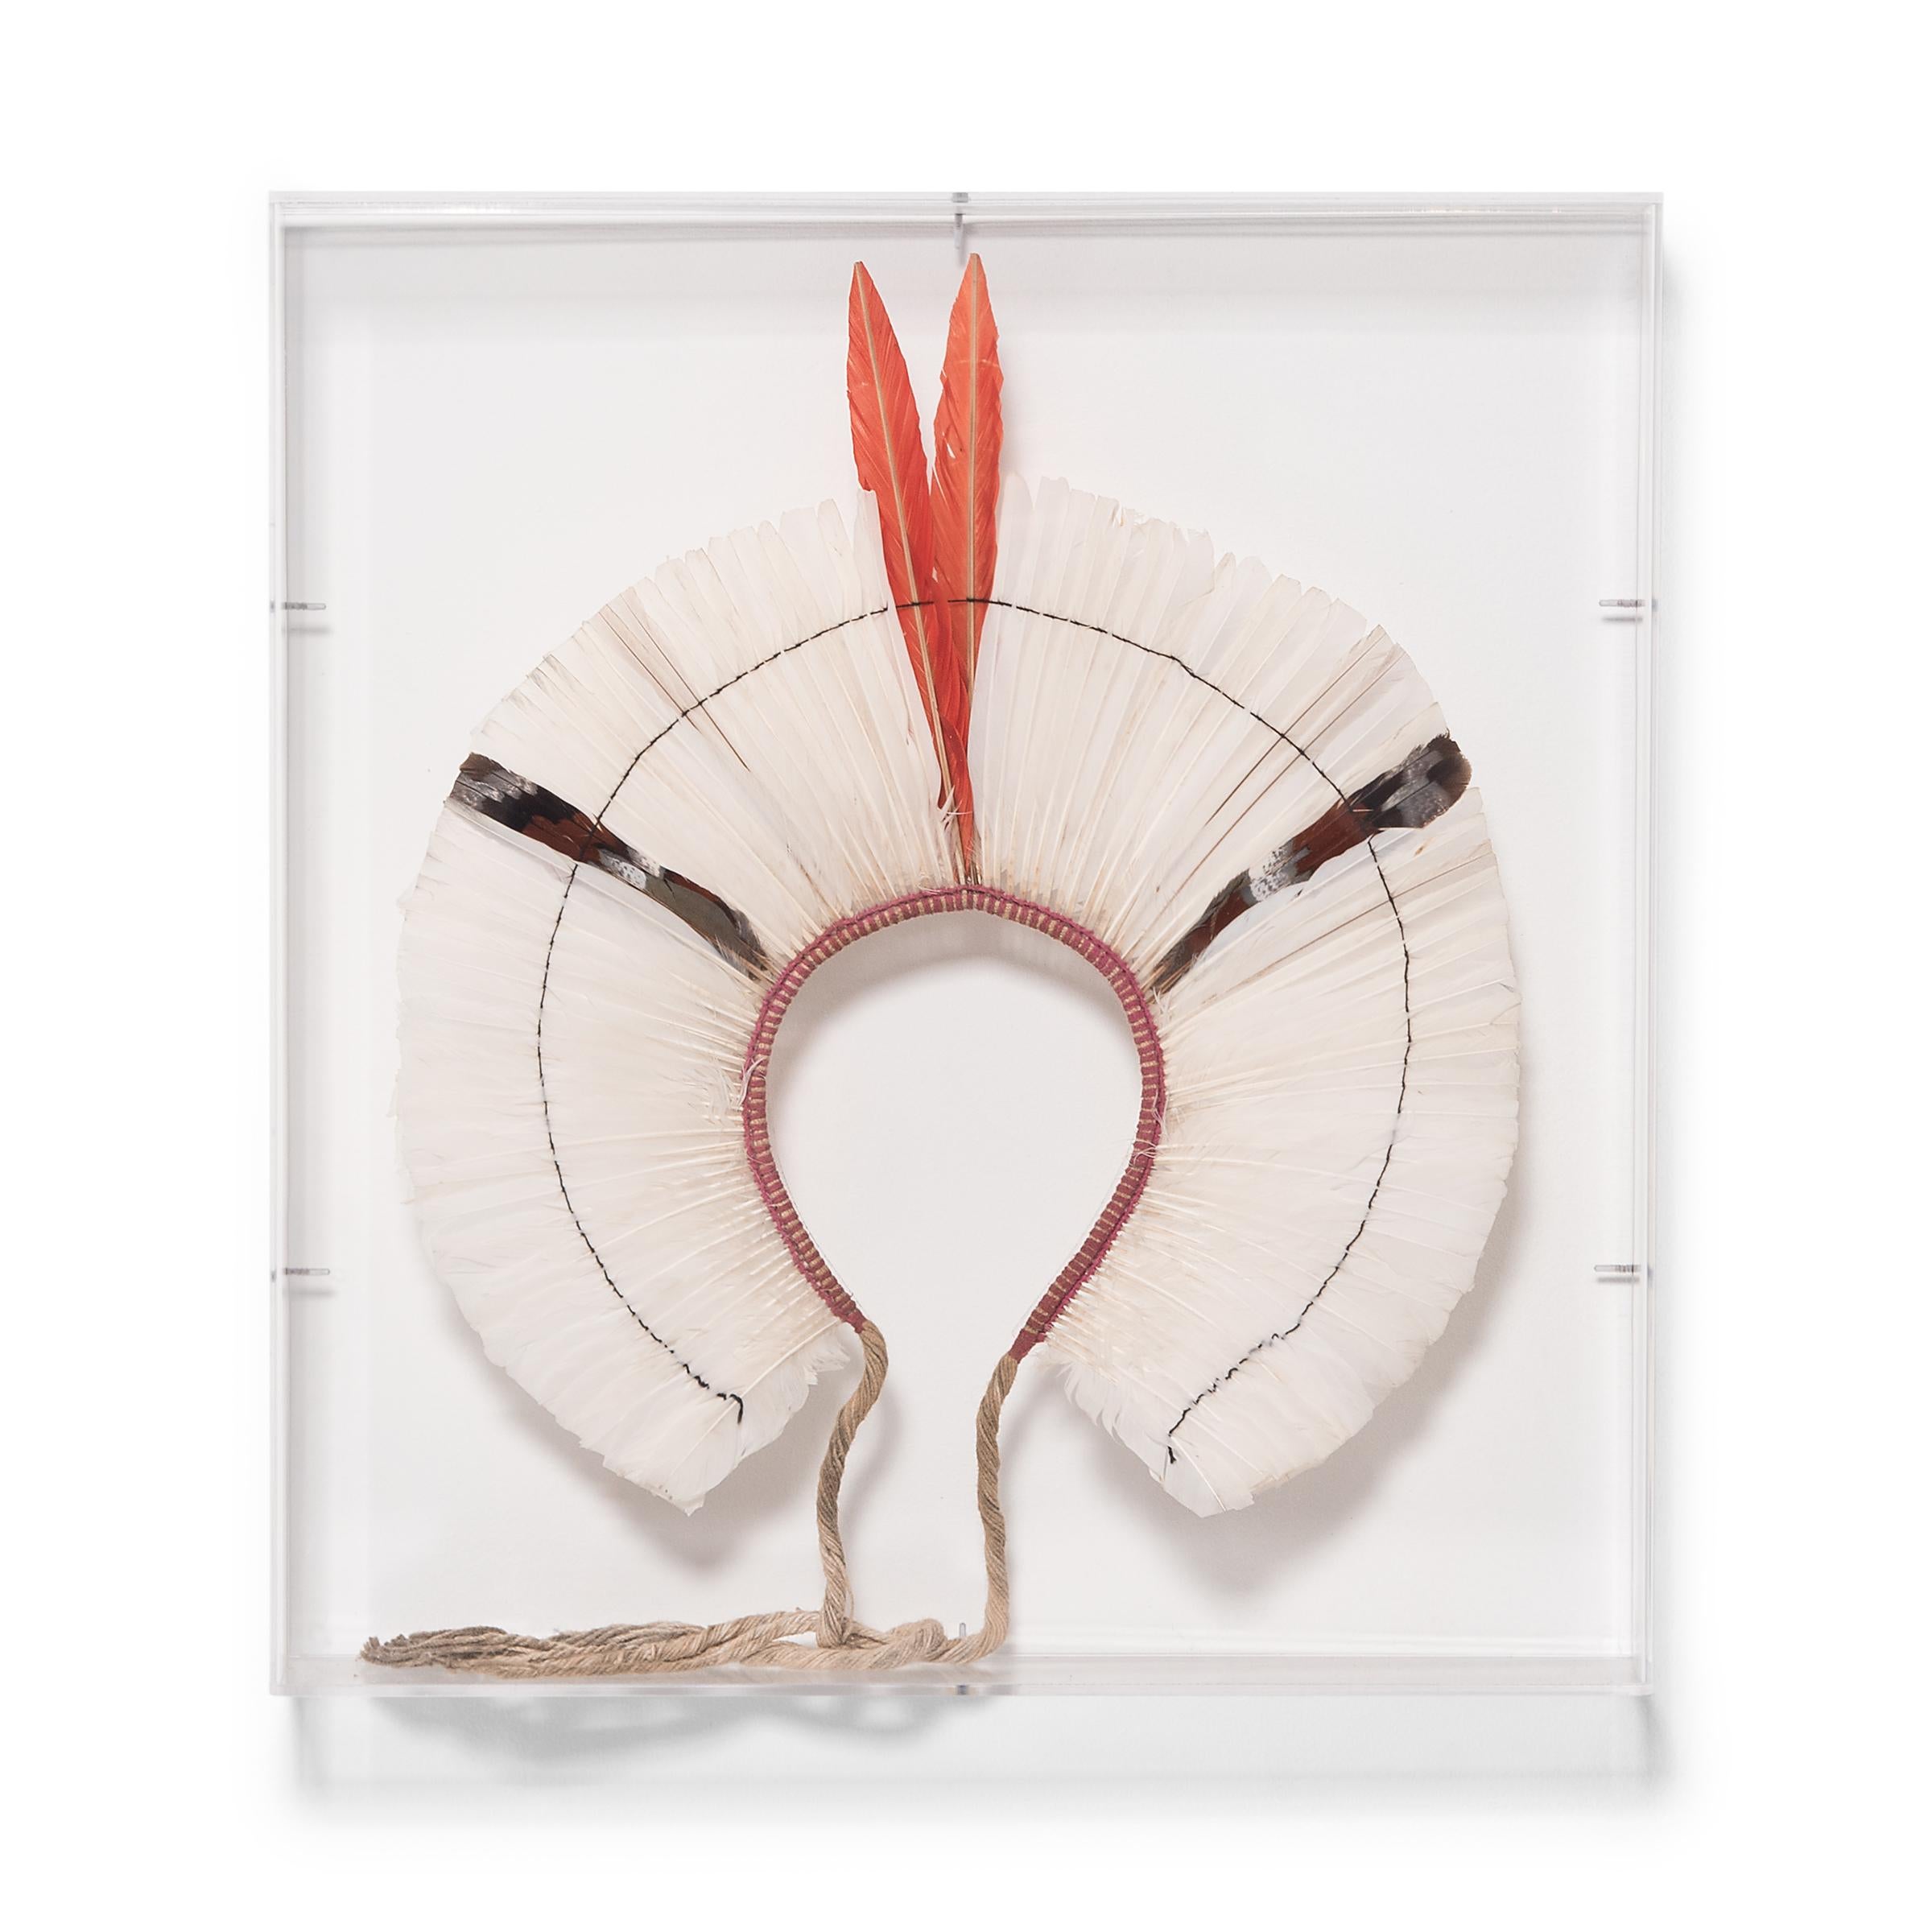 A breathtaking display of color and texture, this round feather headdress is a ceremonial headpiece of the Kayapo people, an indigenous group of the Amazon basin. Sourced from native birds with vibrant plumage, the fan of feathers radiates outwards